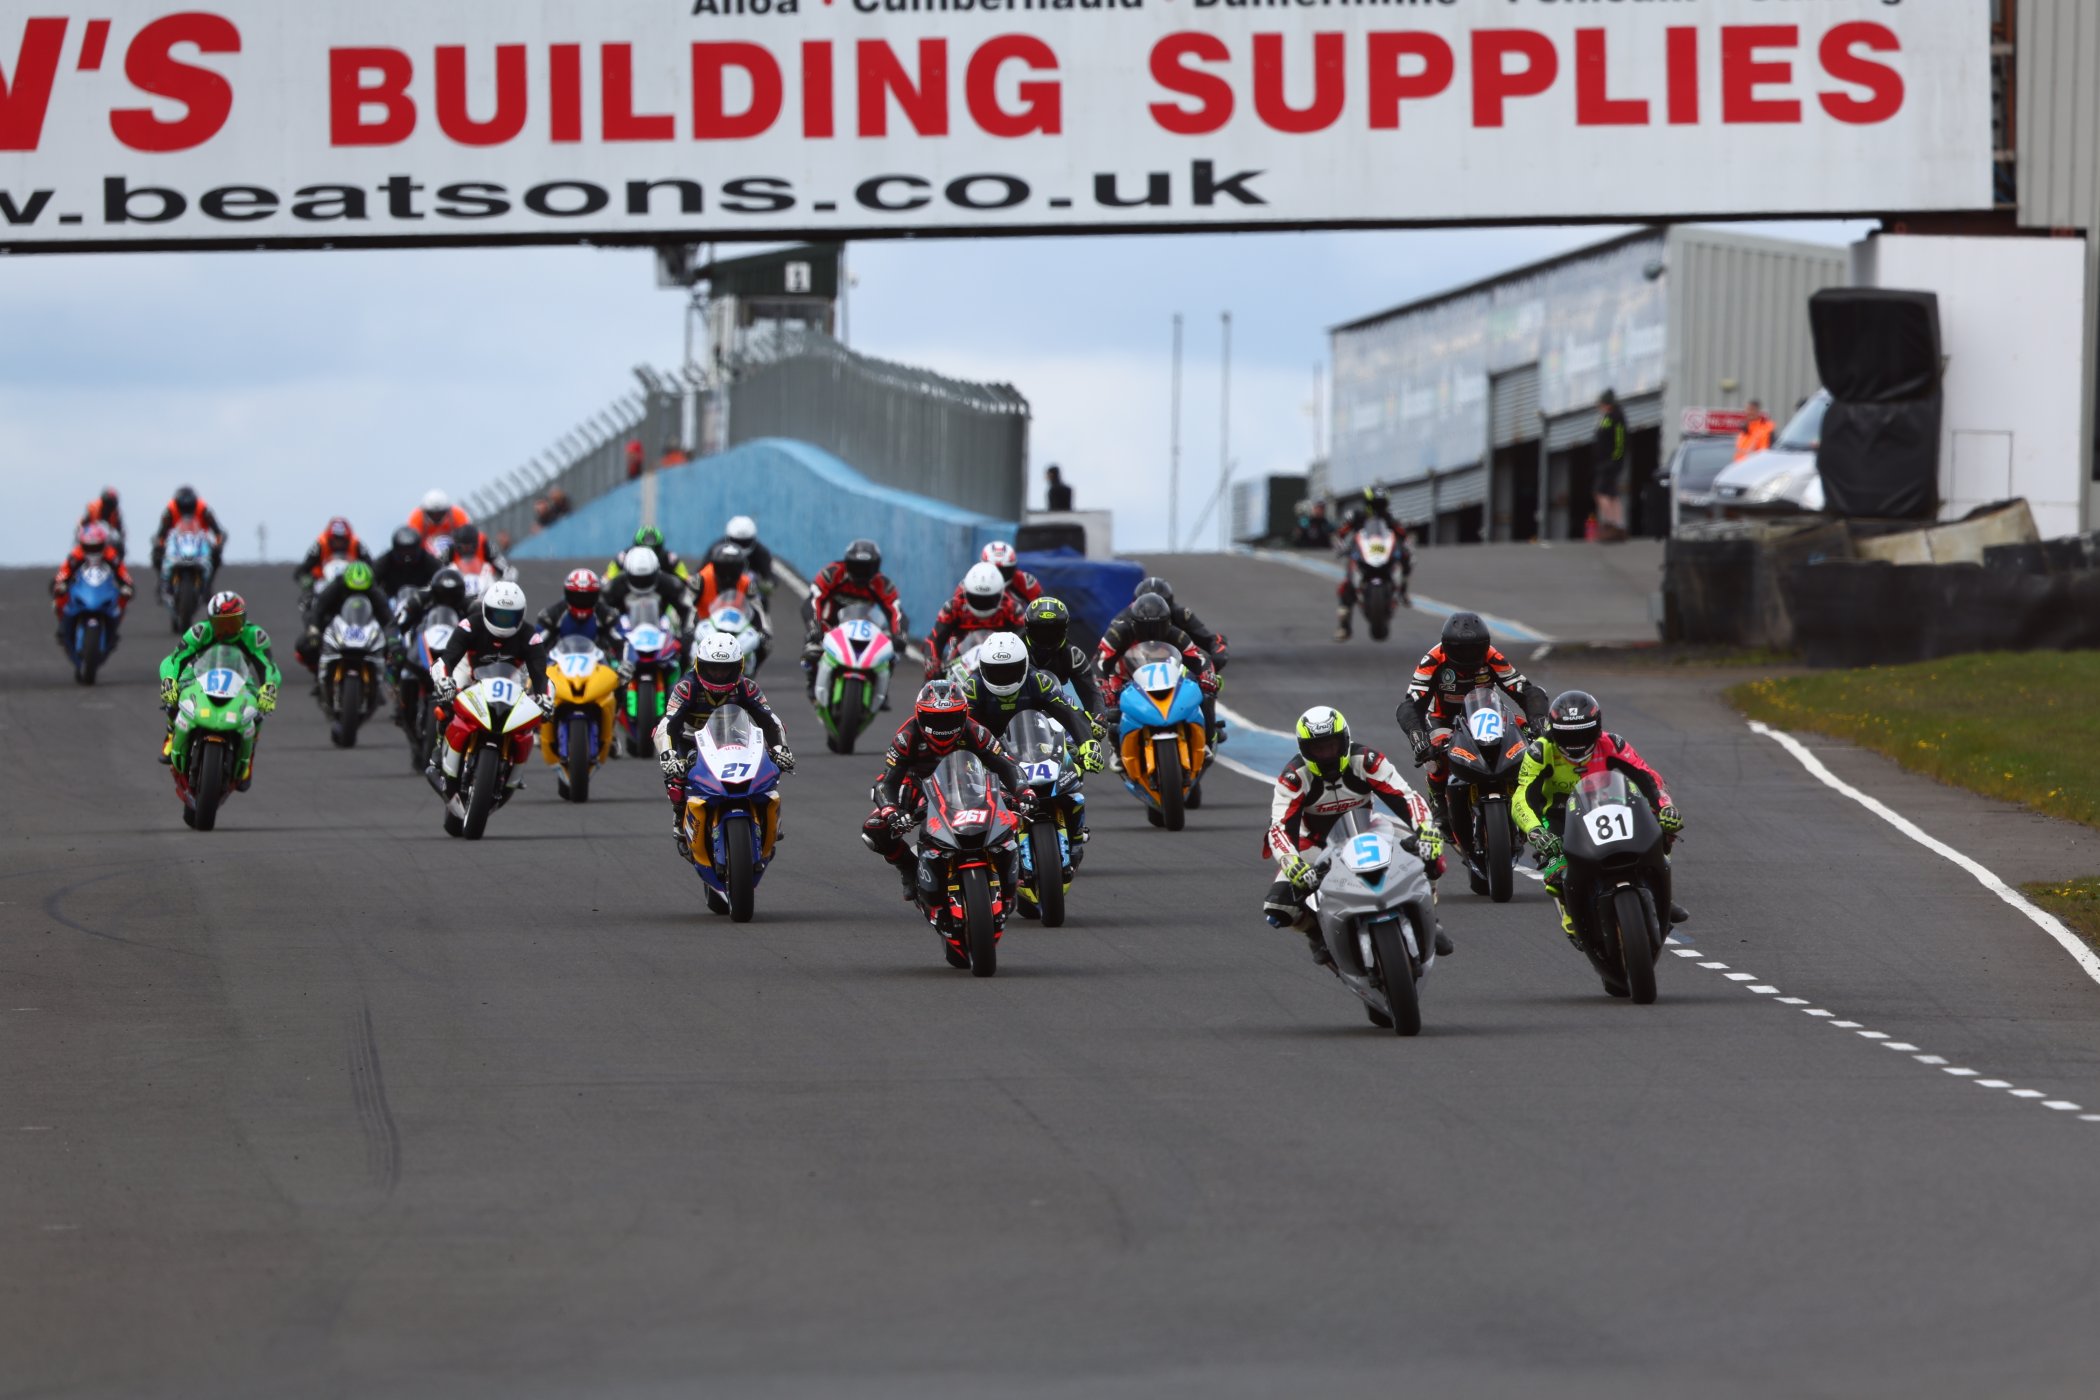 Scottish Championship motorcycling event at Knockhill Racing Circuit -